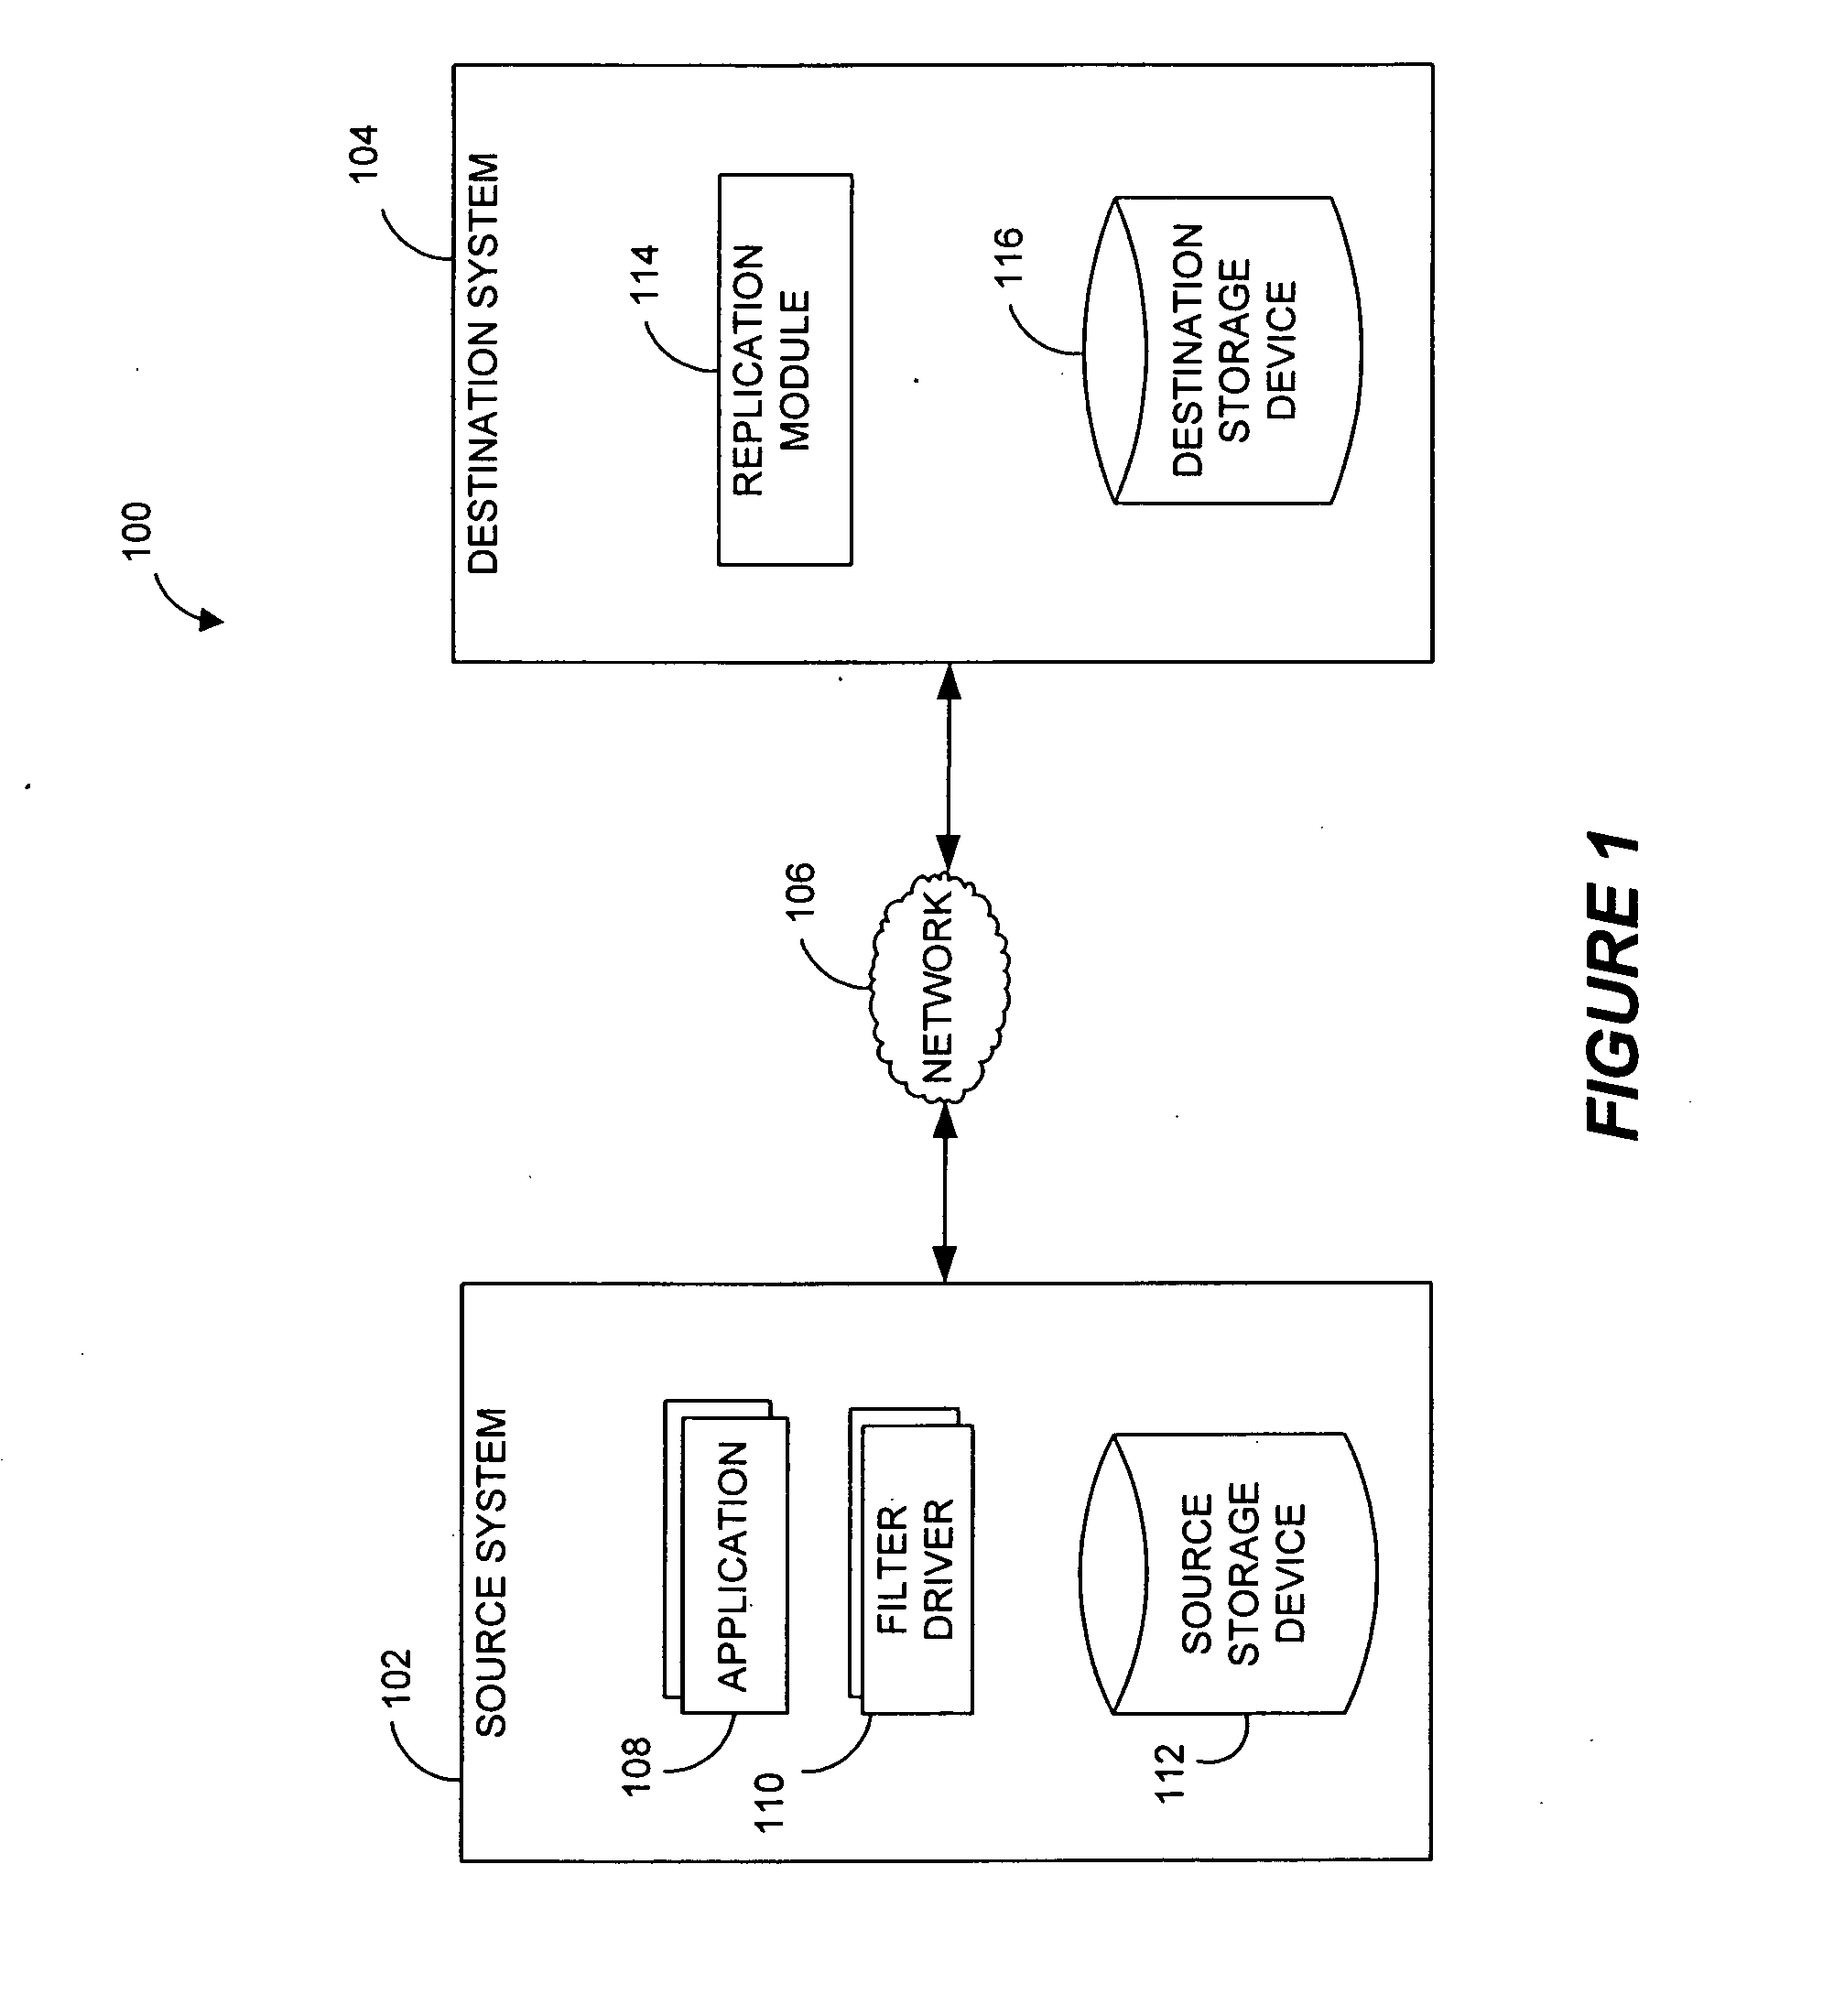 Rolling cache configuration for a data replication system